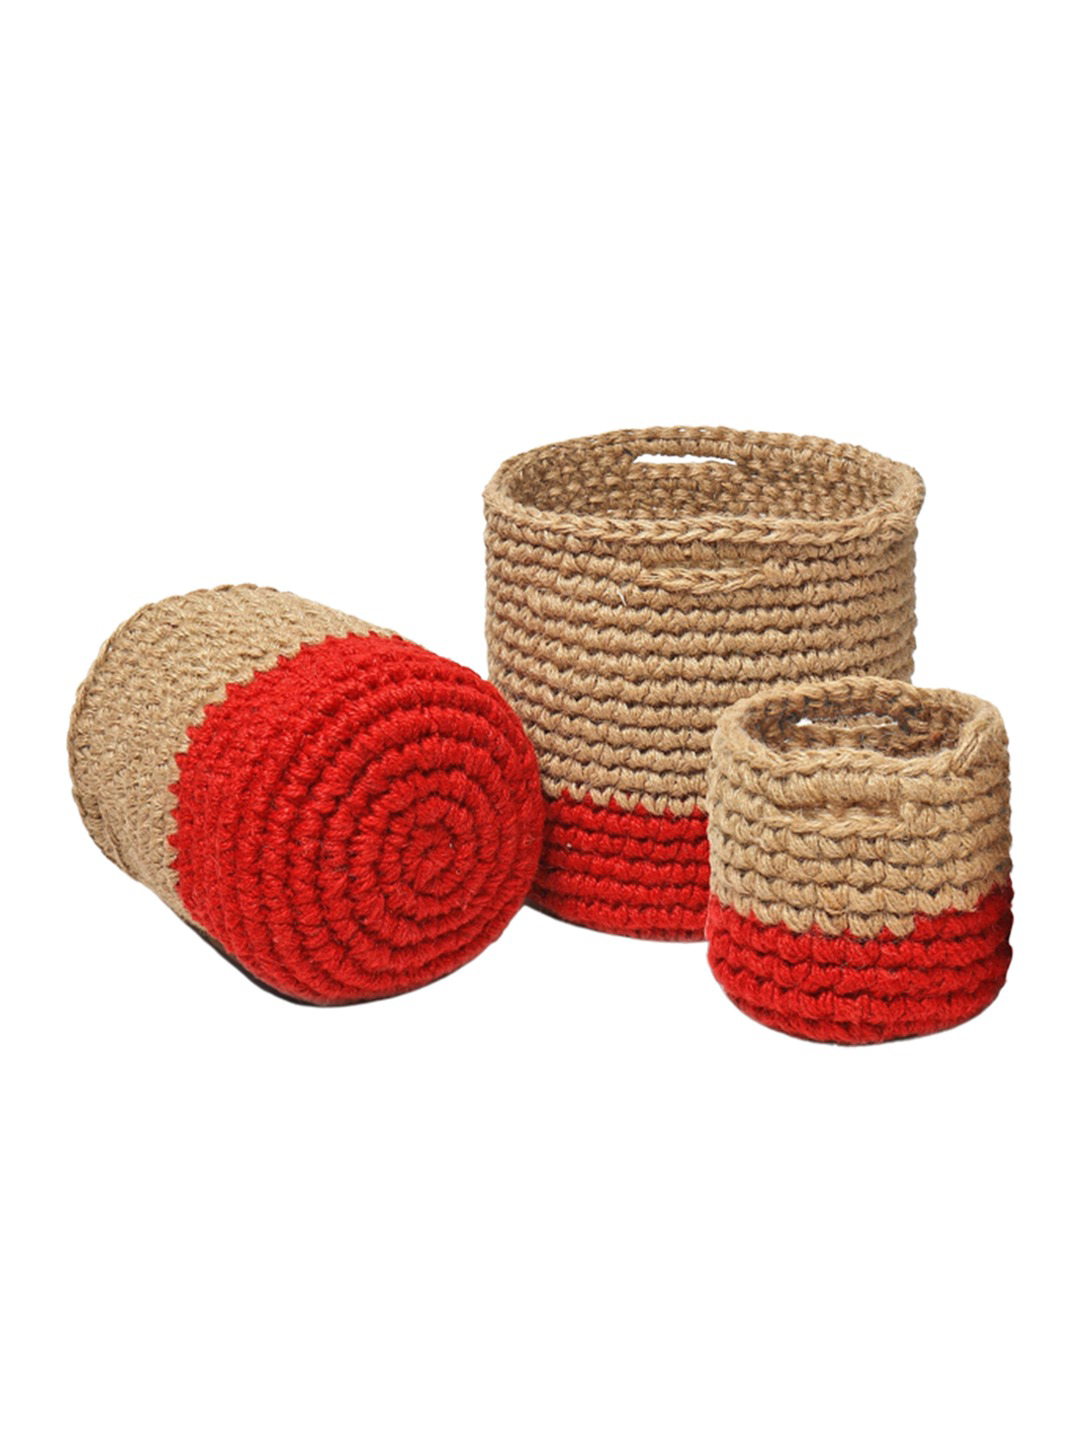 Beige and Red Set of 3 Color blocked Jute Crochet Baskets